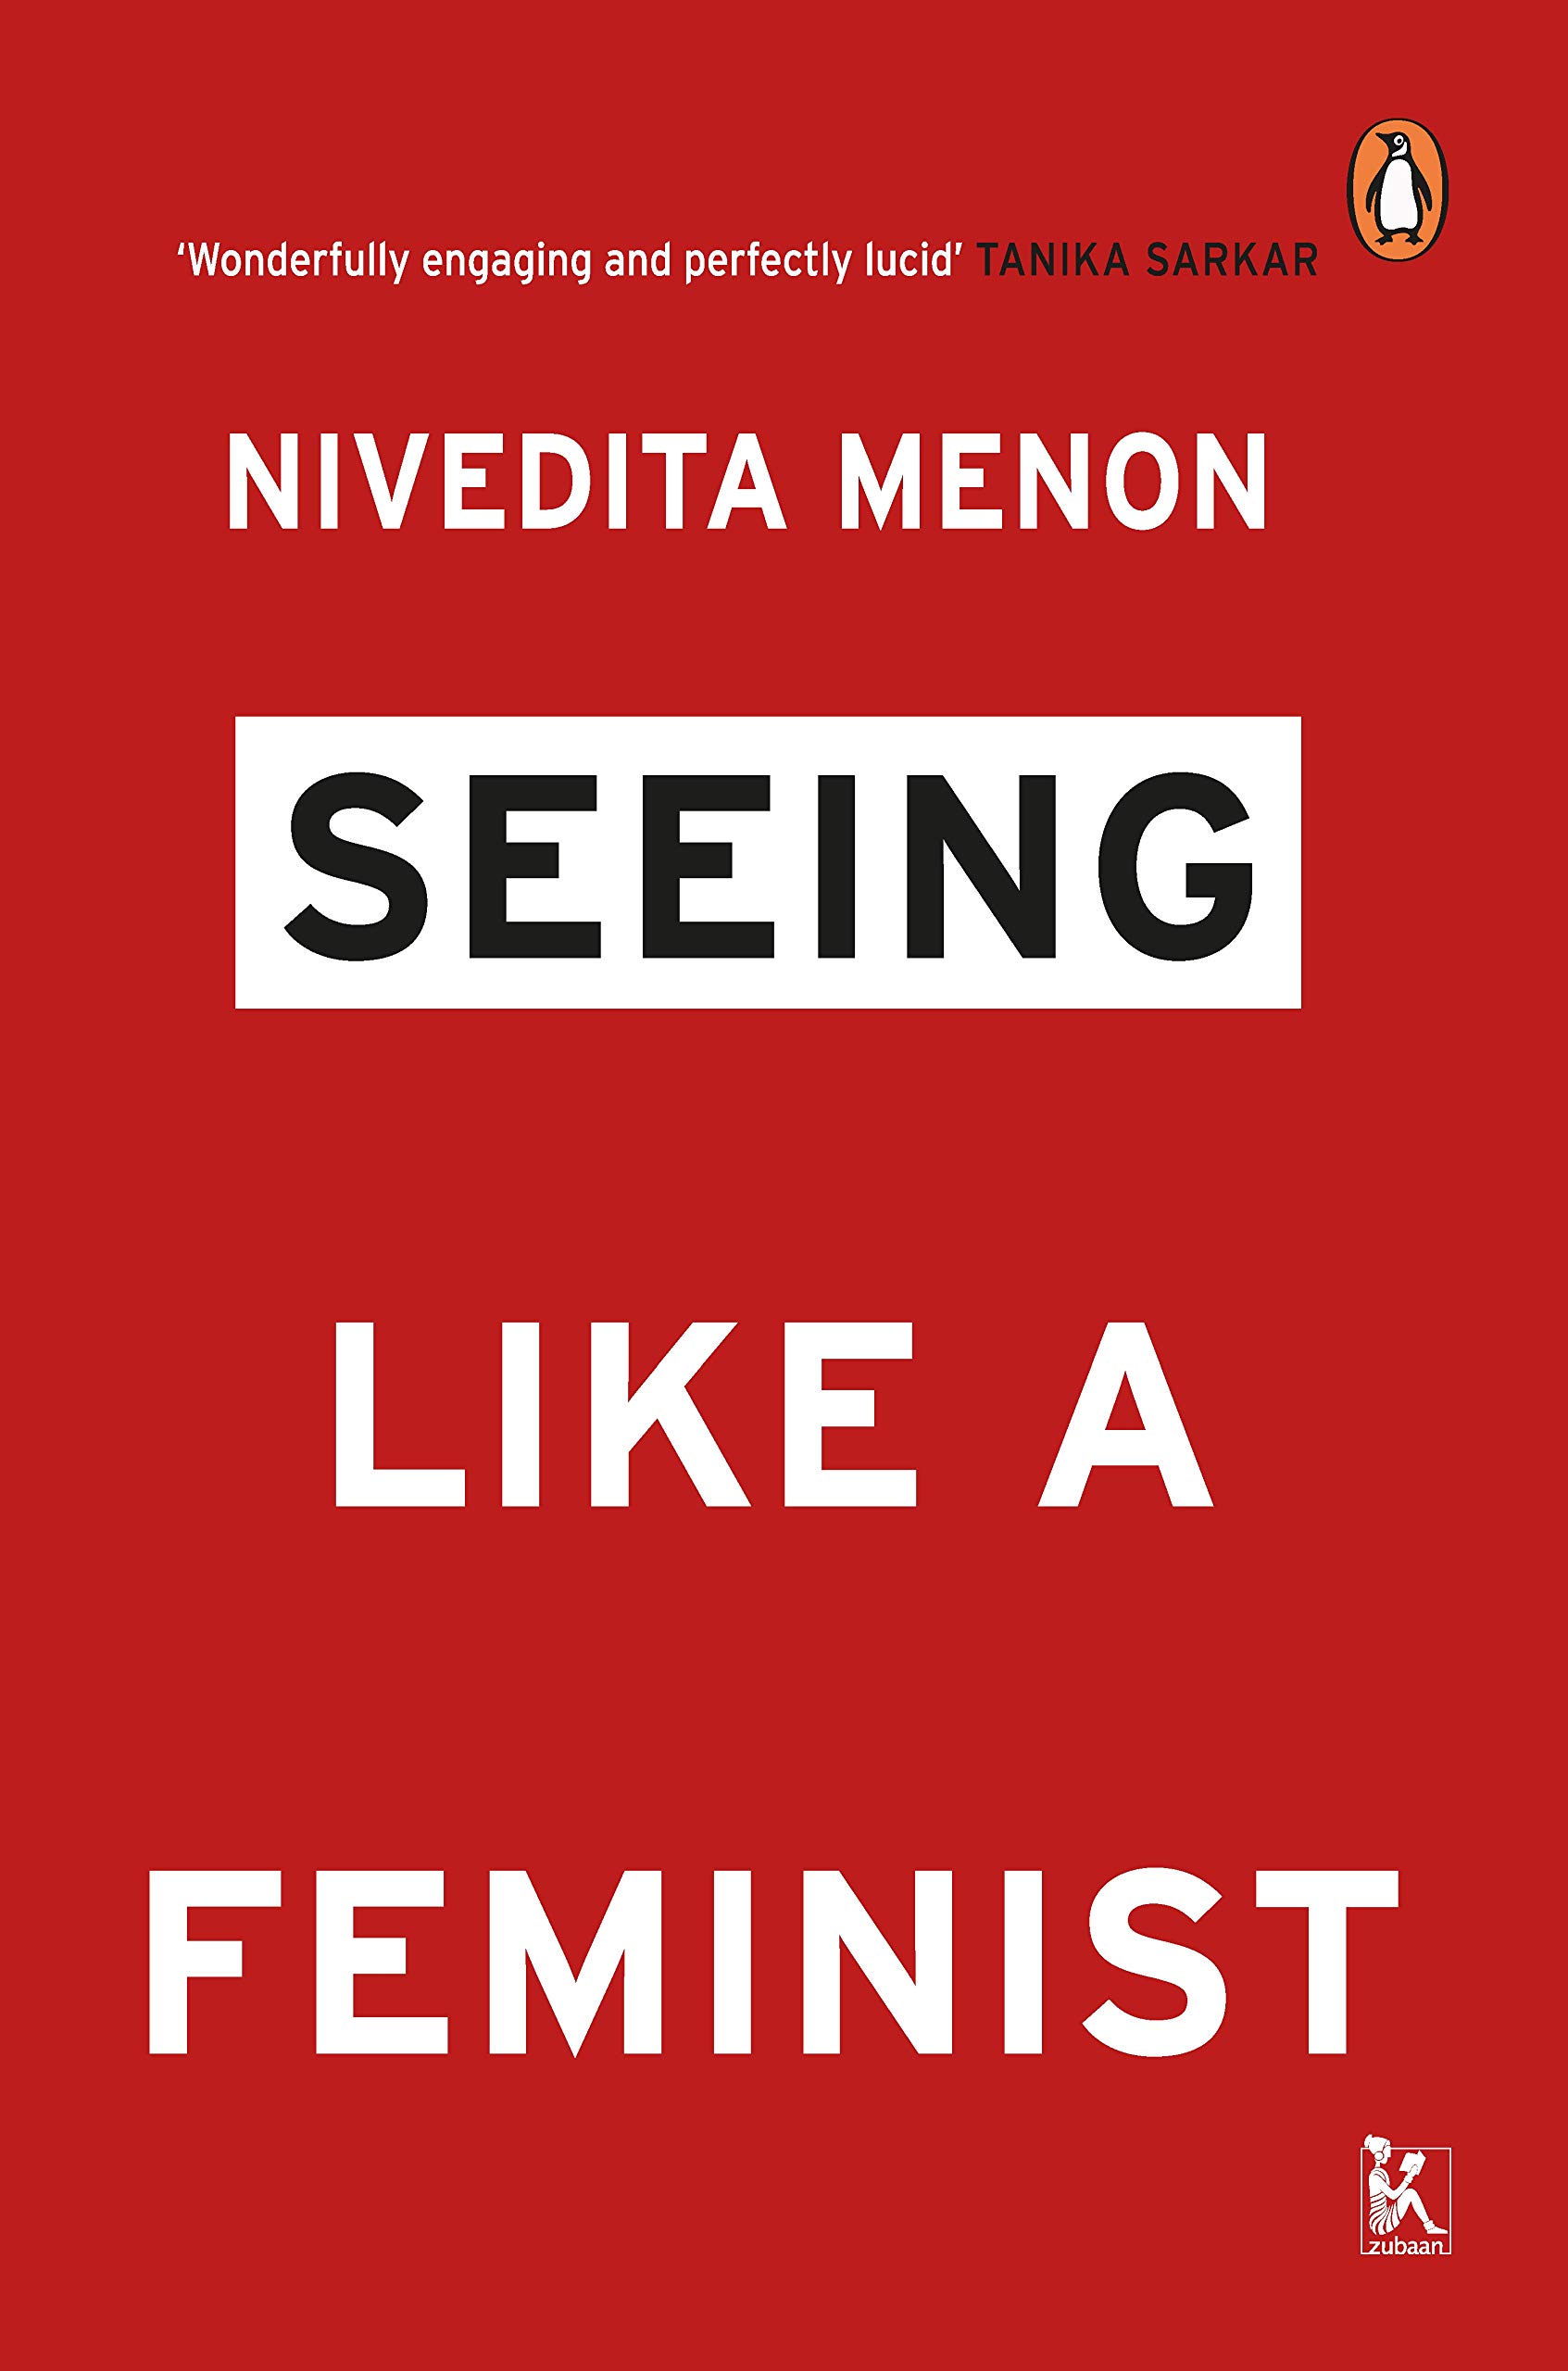 20 Must-Read Books to Understand Feminism in India